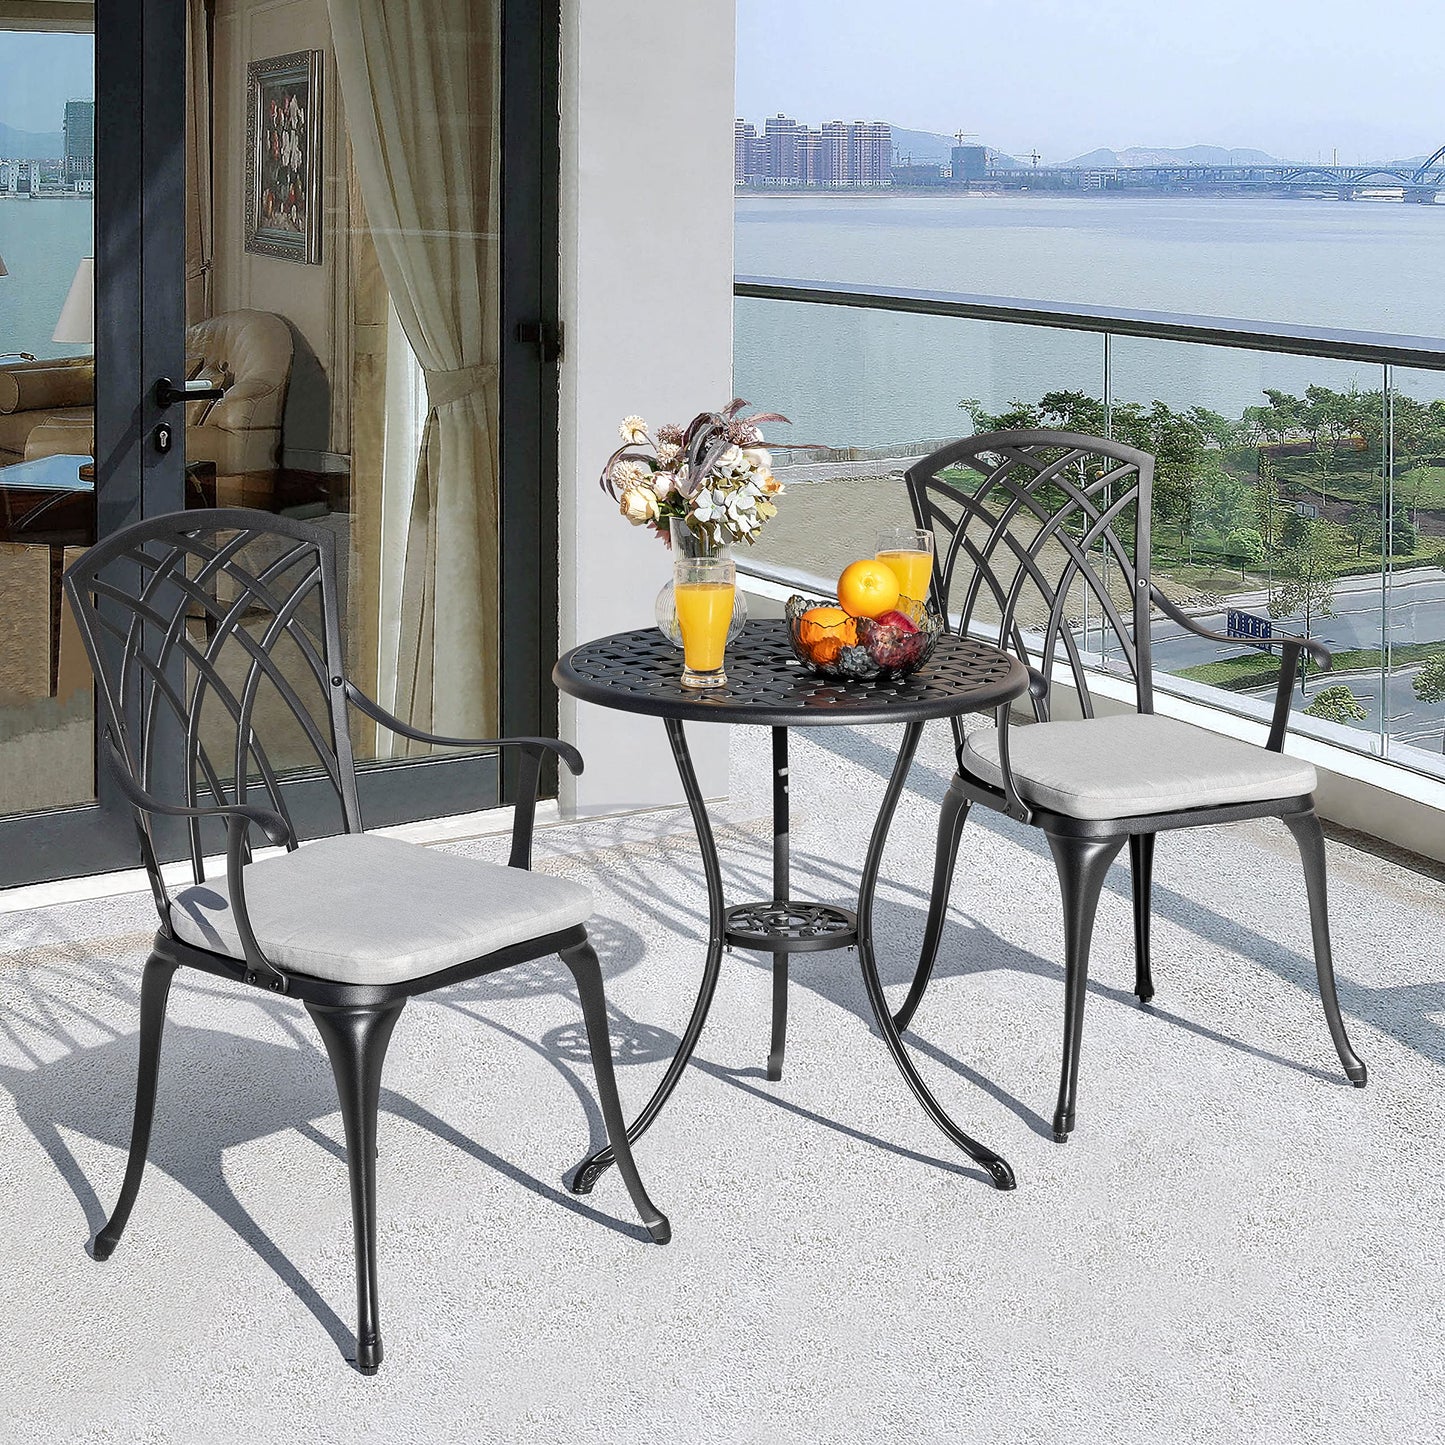 NUU GARDEN 3 Piece Bistro Table Set Cast Aluminum Outdoor Patio Furniture with Umbrella Hole and Grey Cushions for Patio Balcony, Black